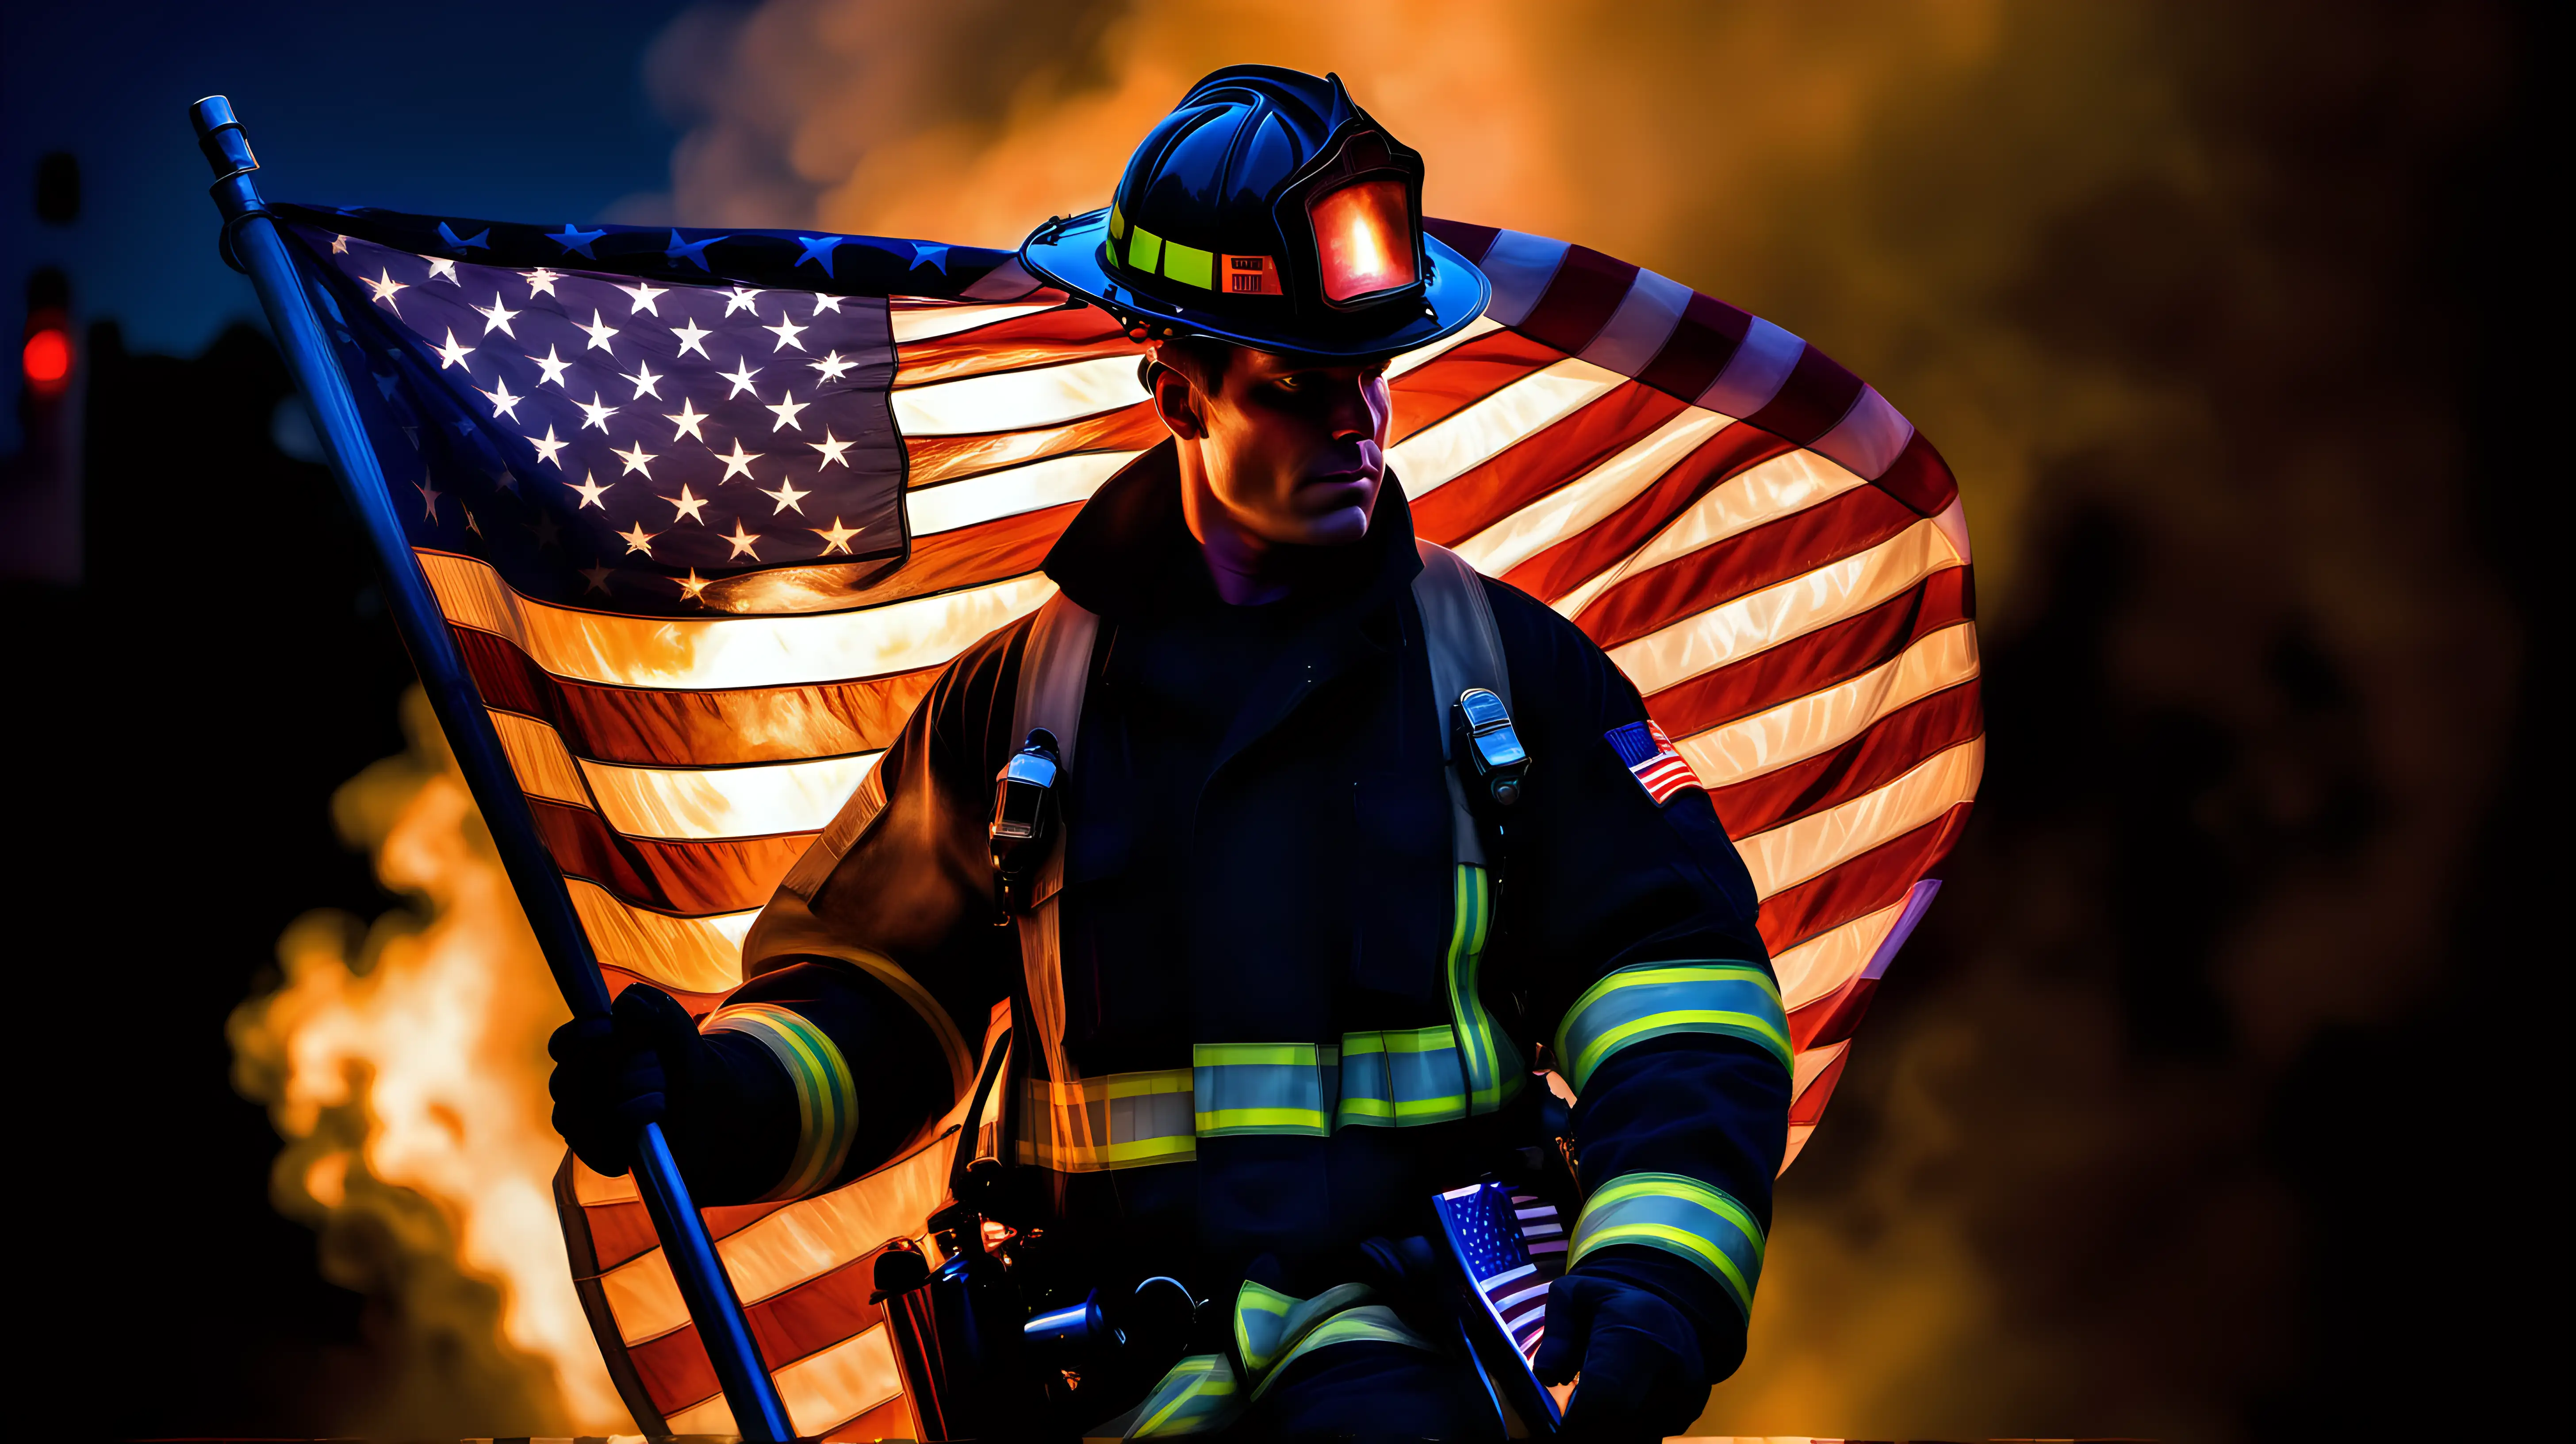 Dedicated Firefighter Holding Glowing American Flag